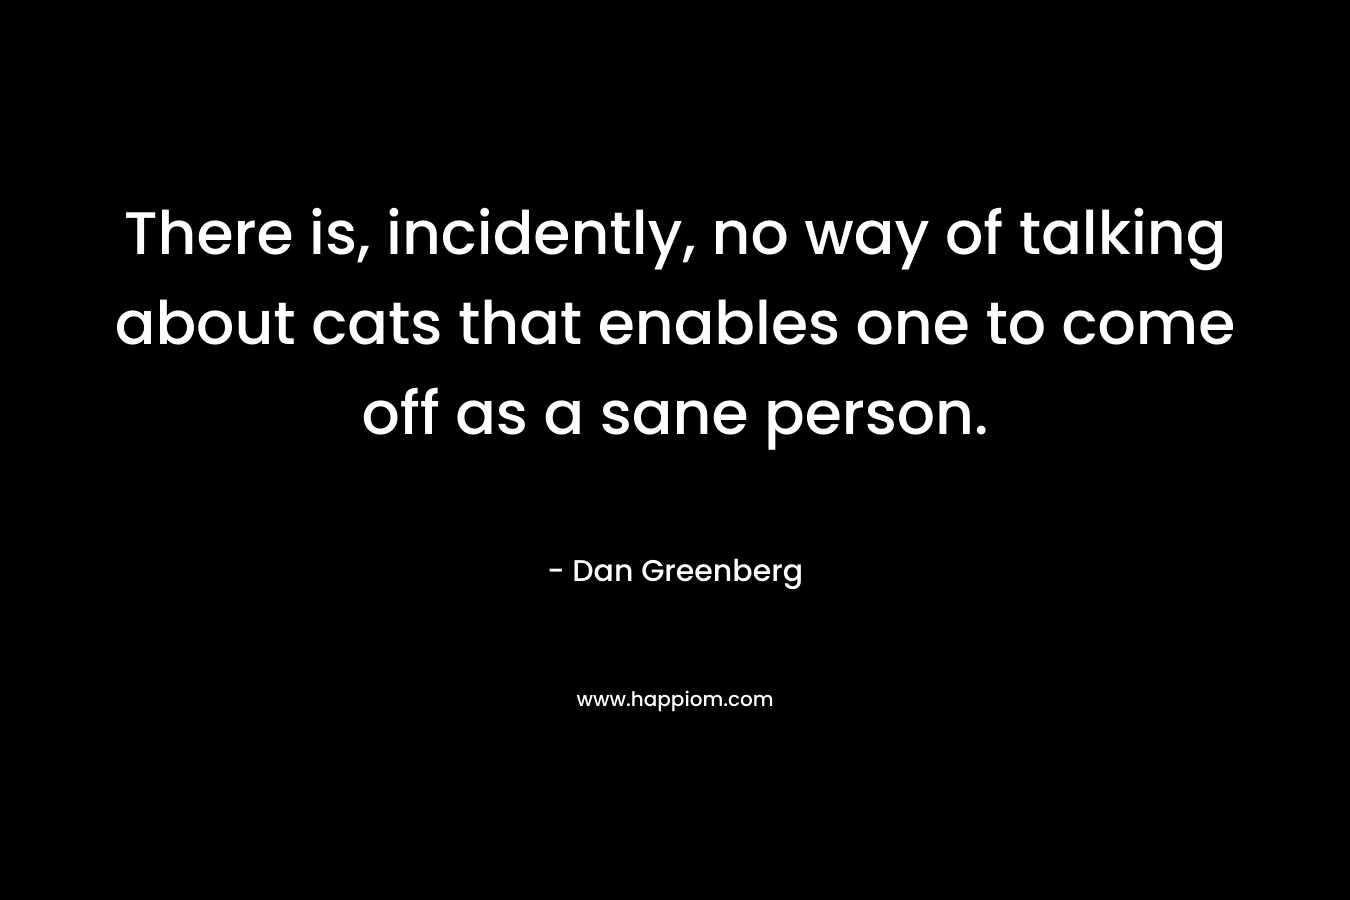 There is, incidently, no way of talking about cats that enables one to come off as a sane person. – Dan Greenberg